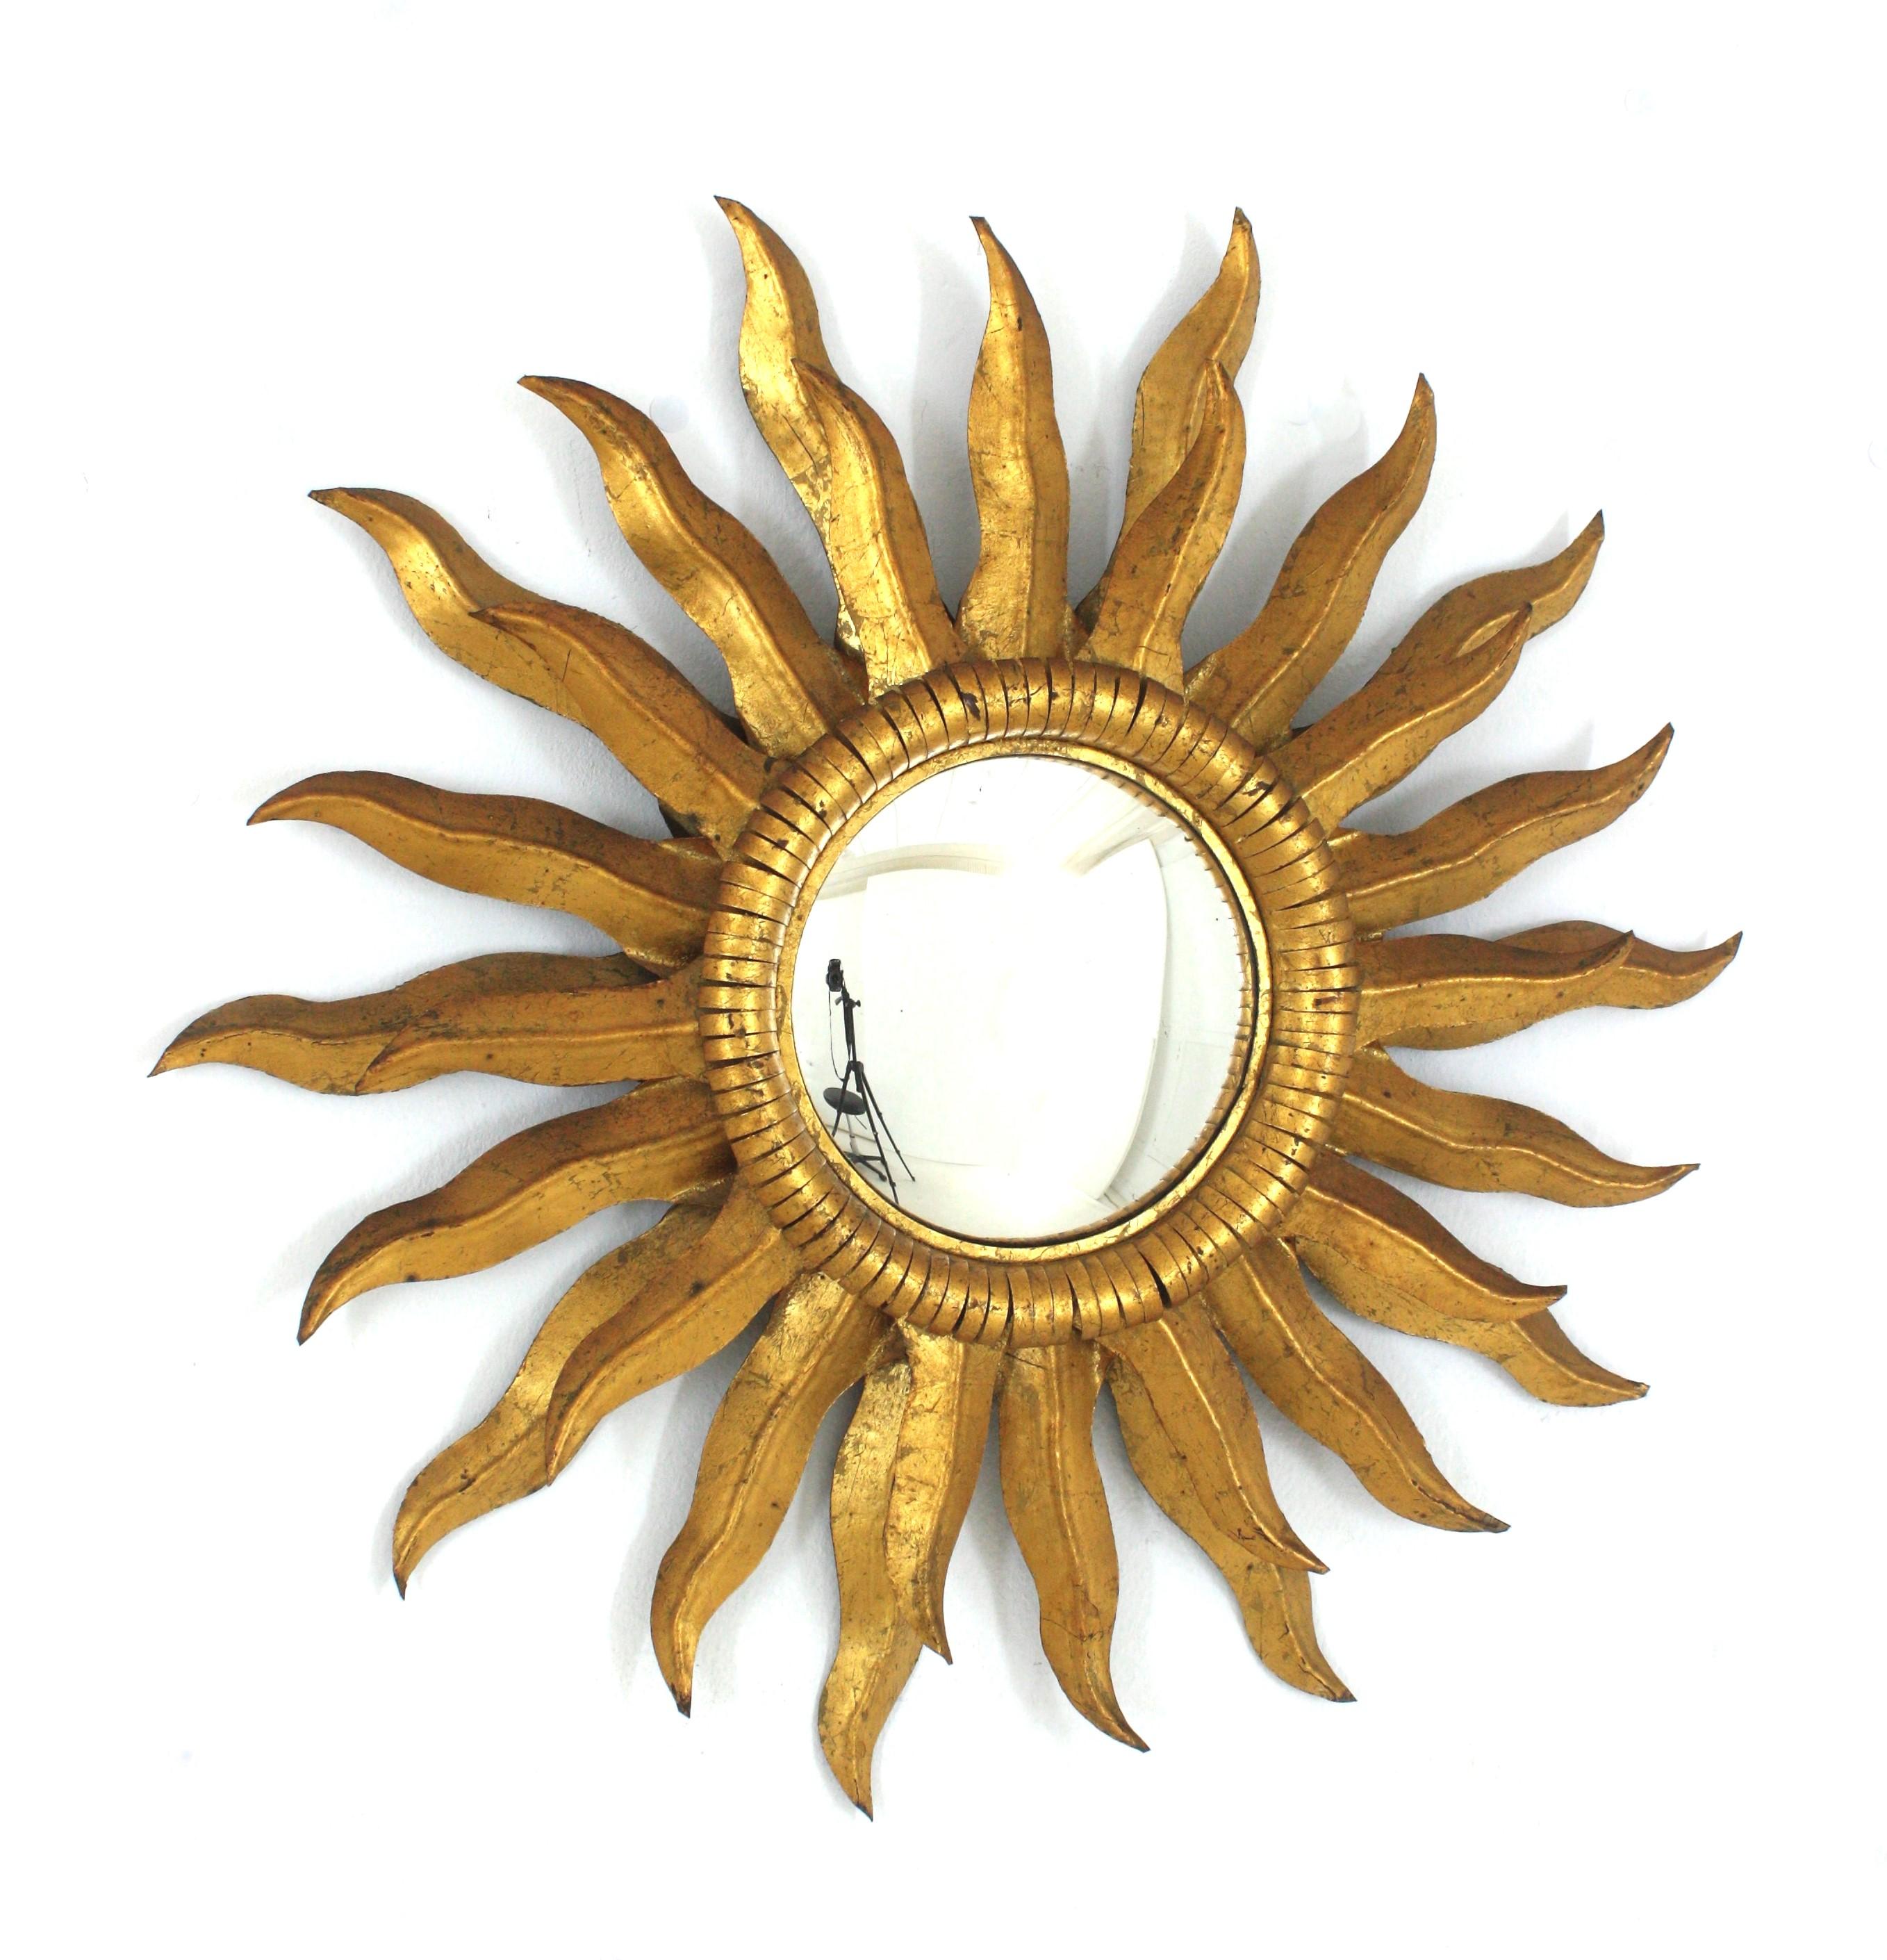 Spanish Double Layered Convex Sunburst Mirror in Gilt Metal, 1950s For Sale 9